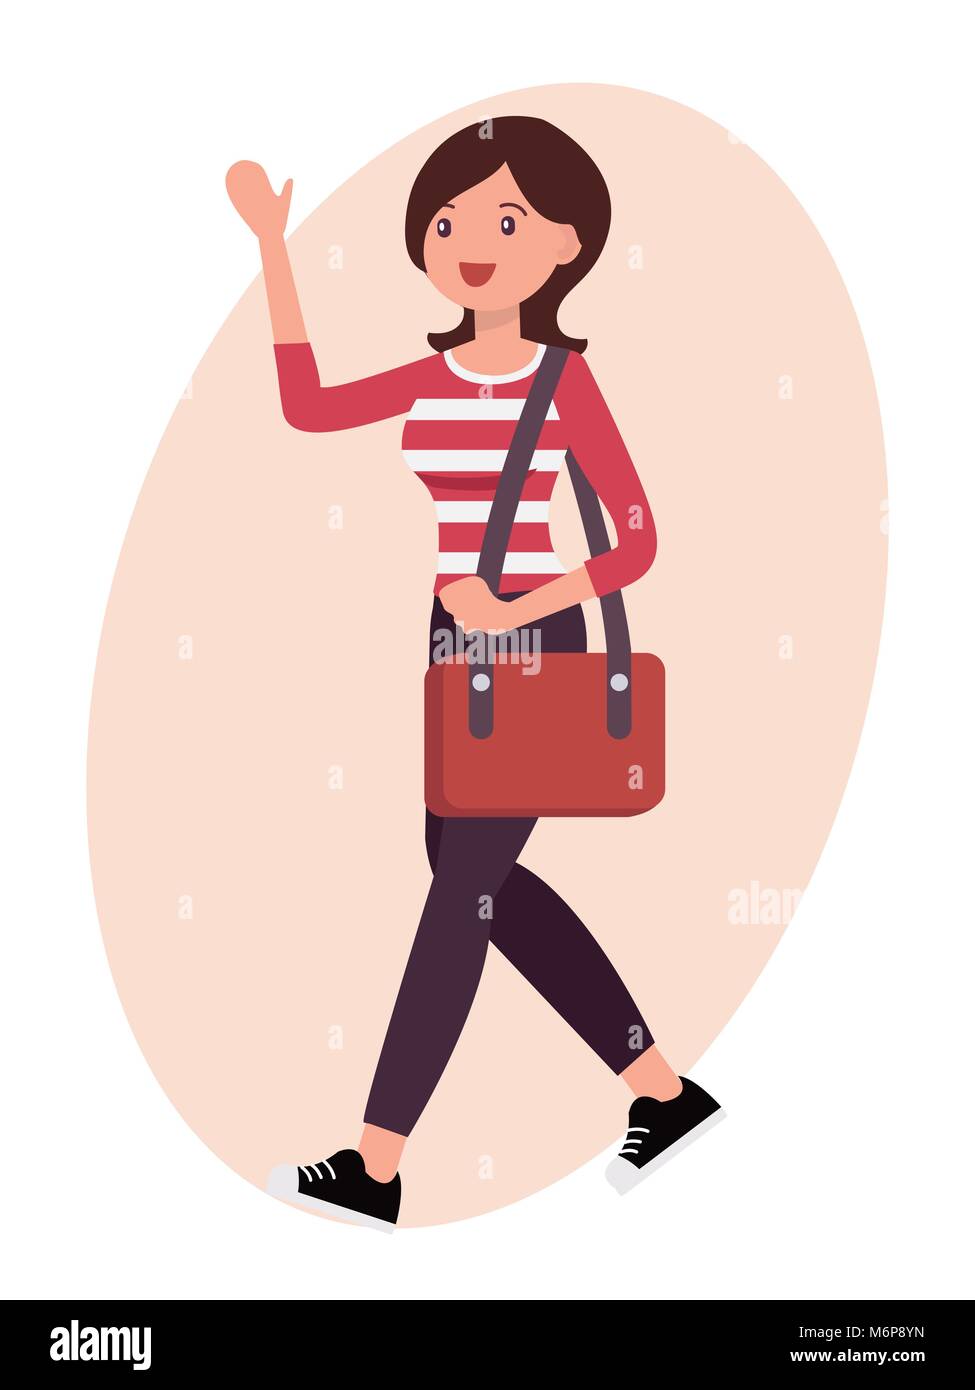 Cartoon character design female woman wave hand greeting with shoulder bag Stock Vector